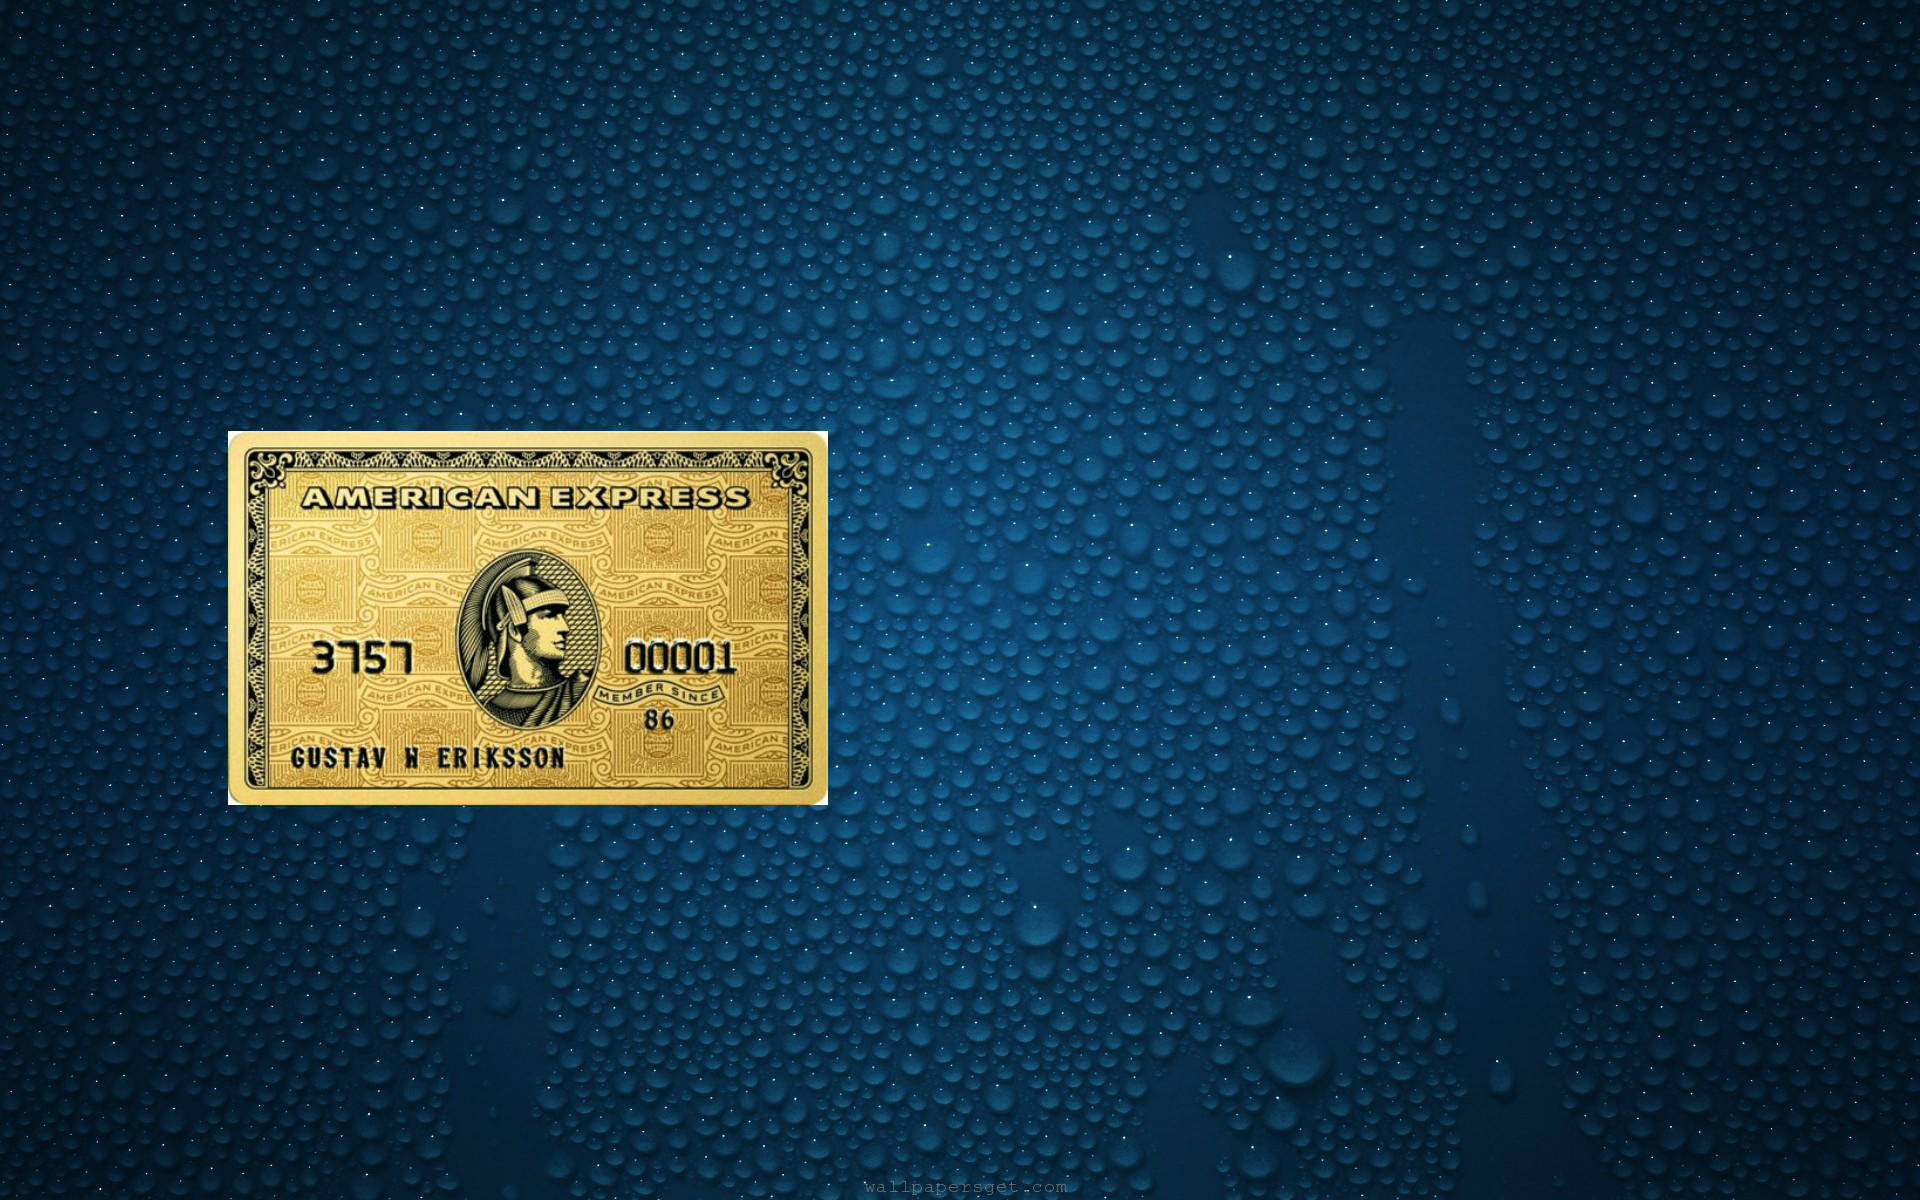 American Express Old Gold Card Background